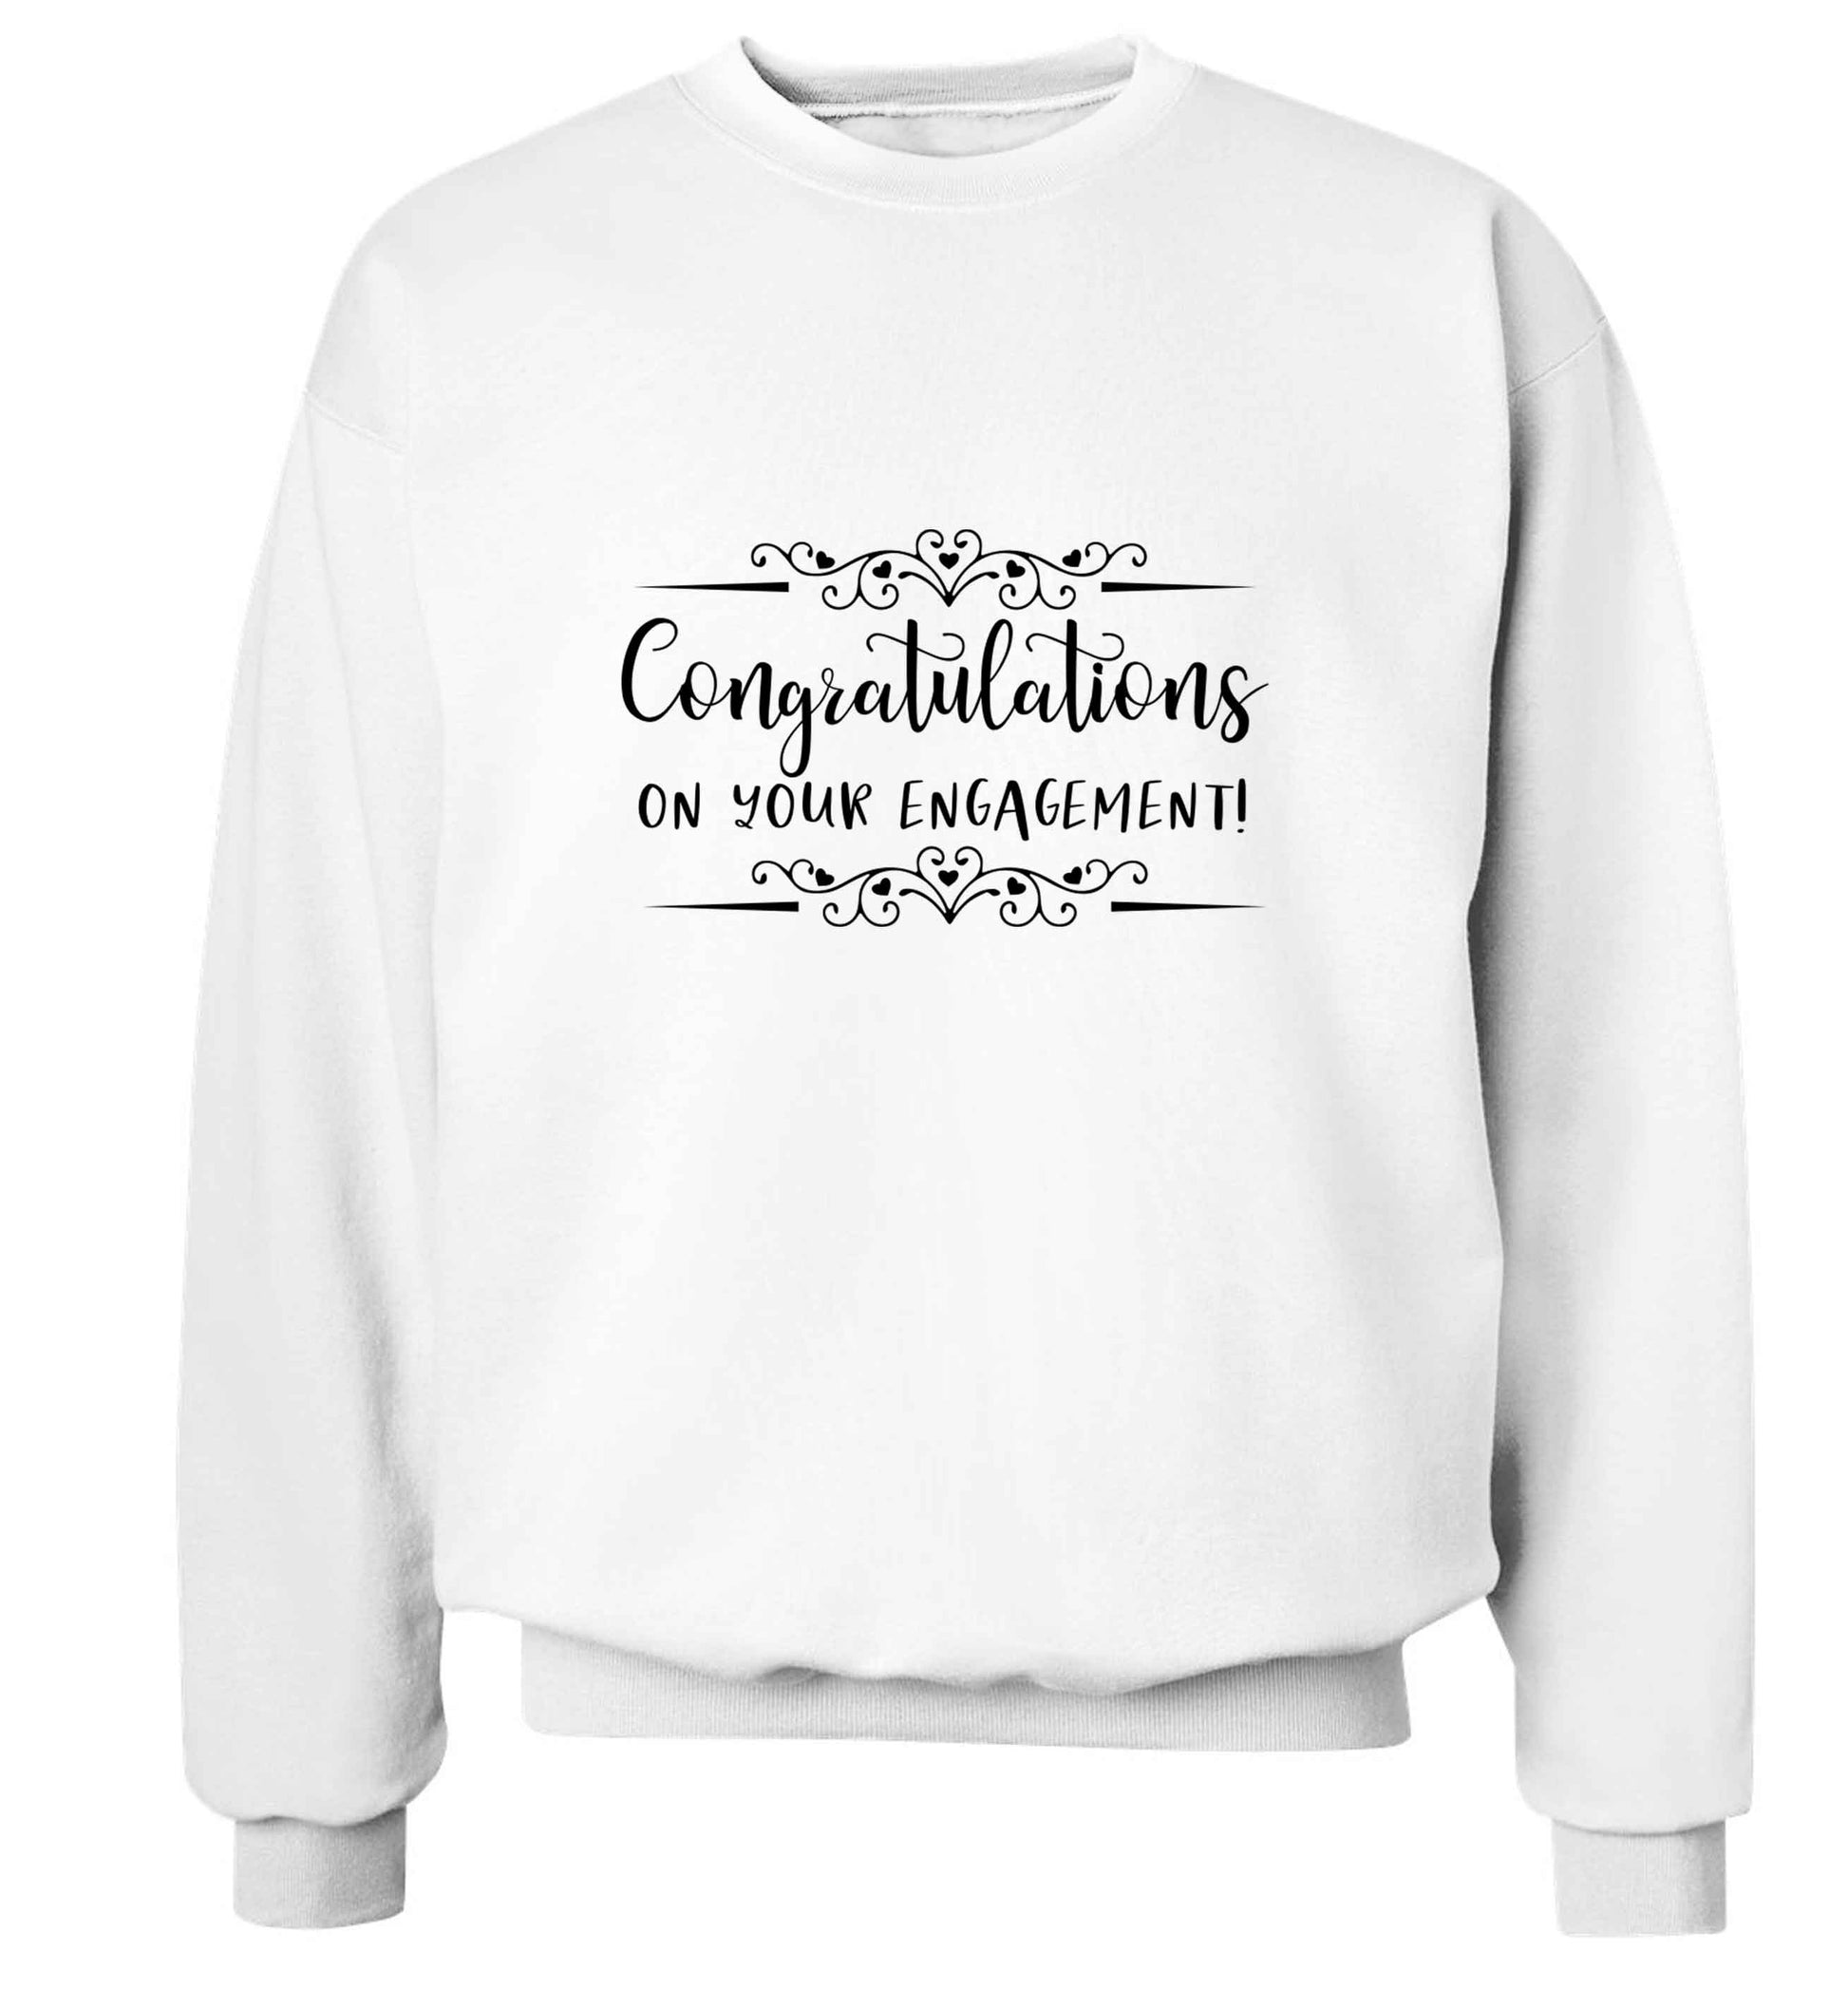 Congratulations on your engagement adult's unisex white sweater 2XL